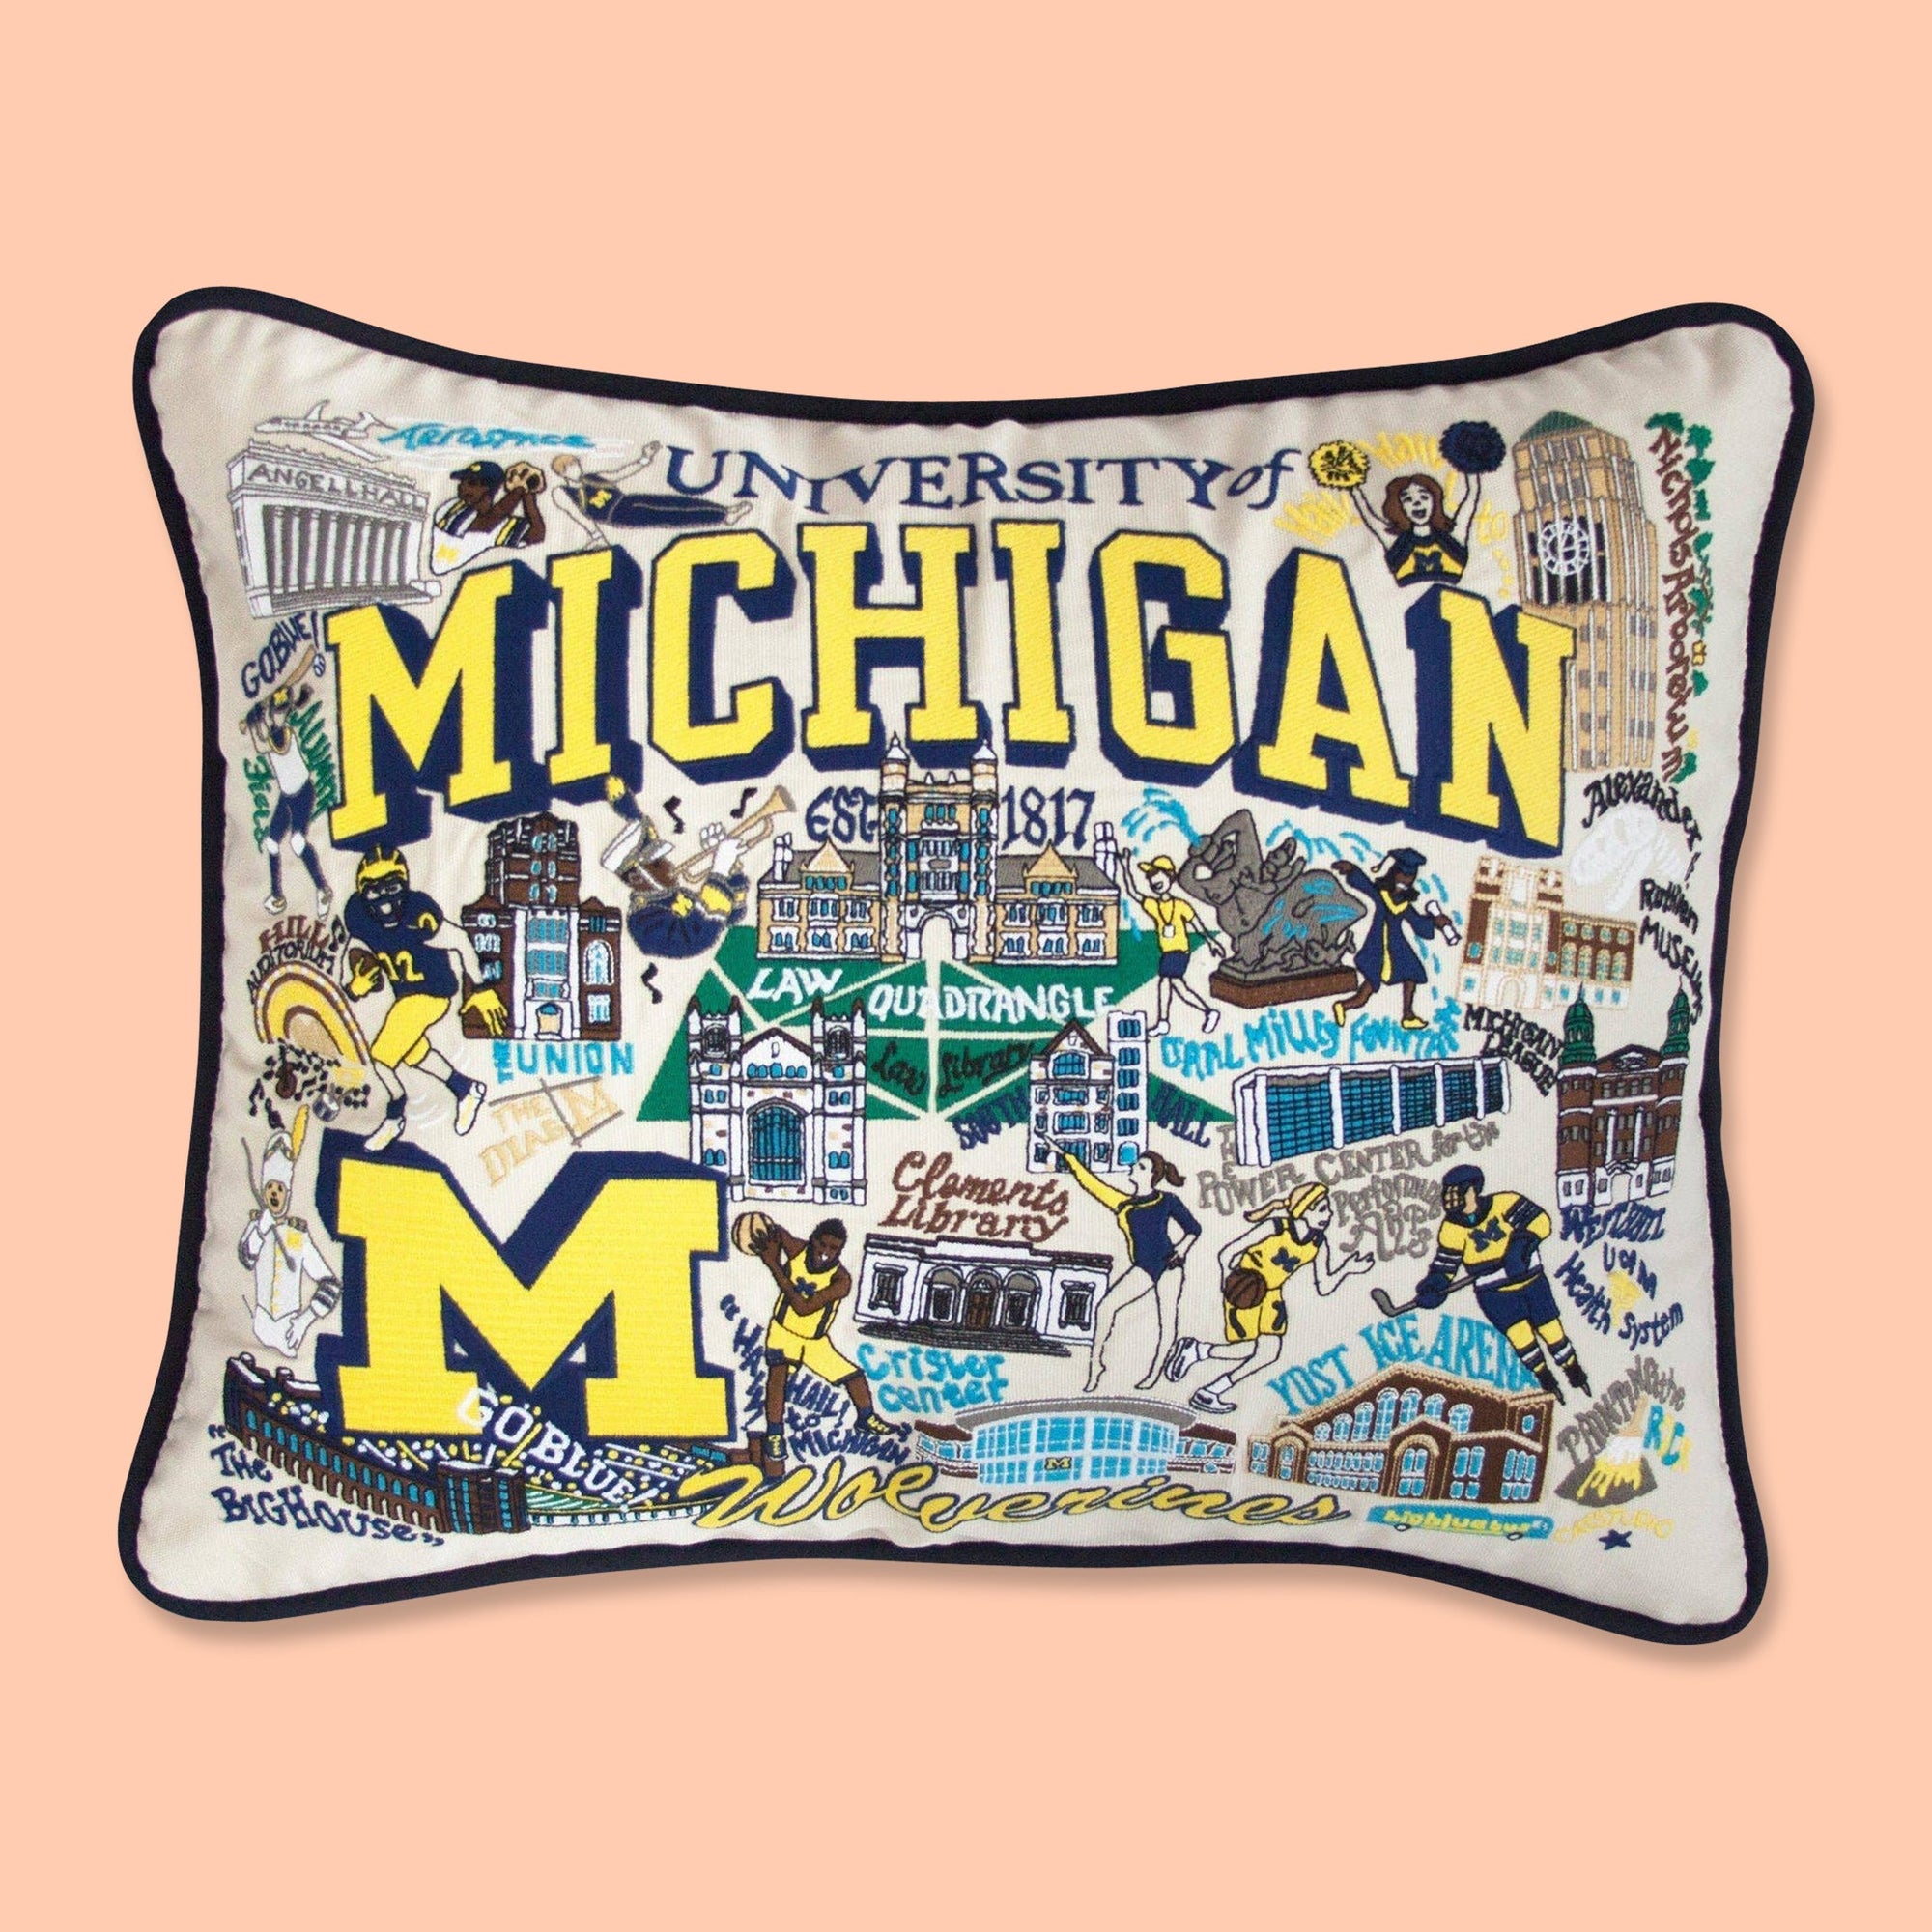 University of Michigan Embroidered Pillow